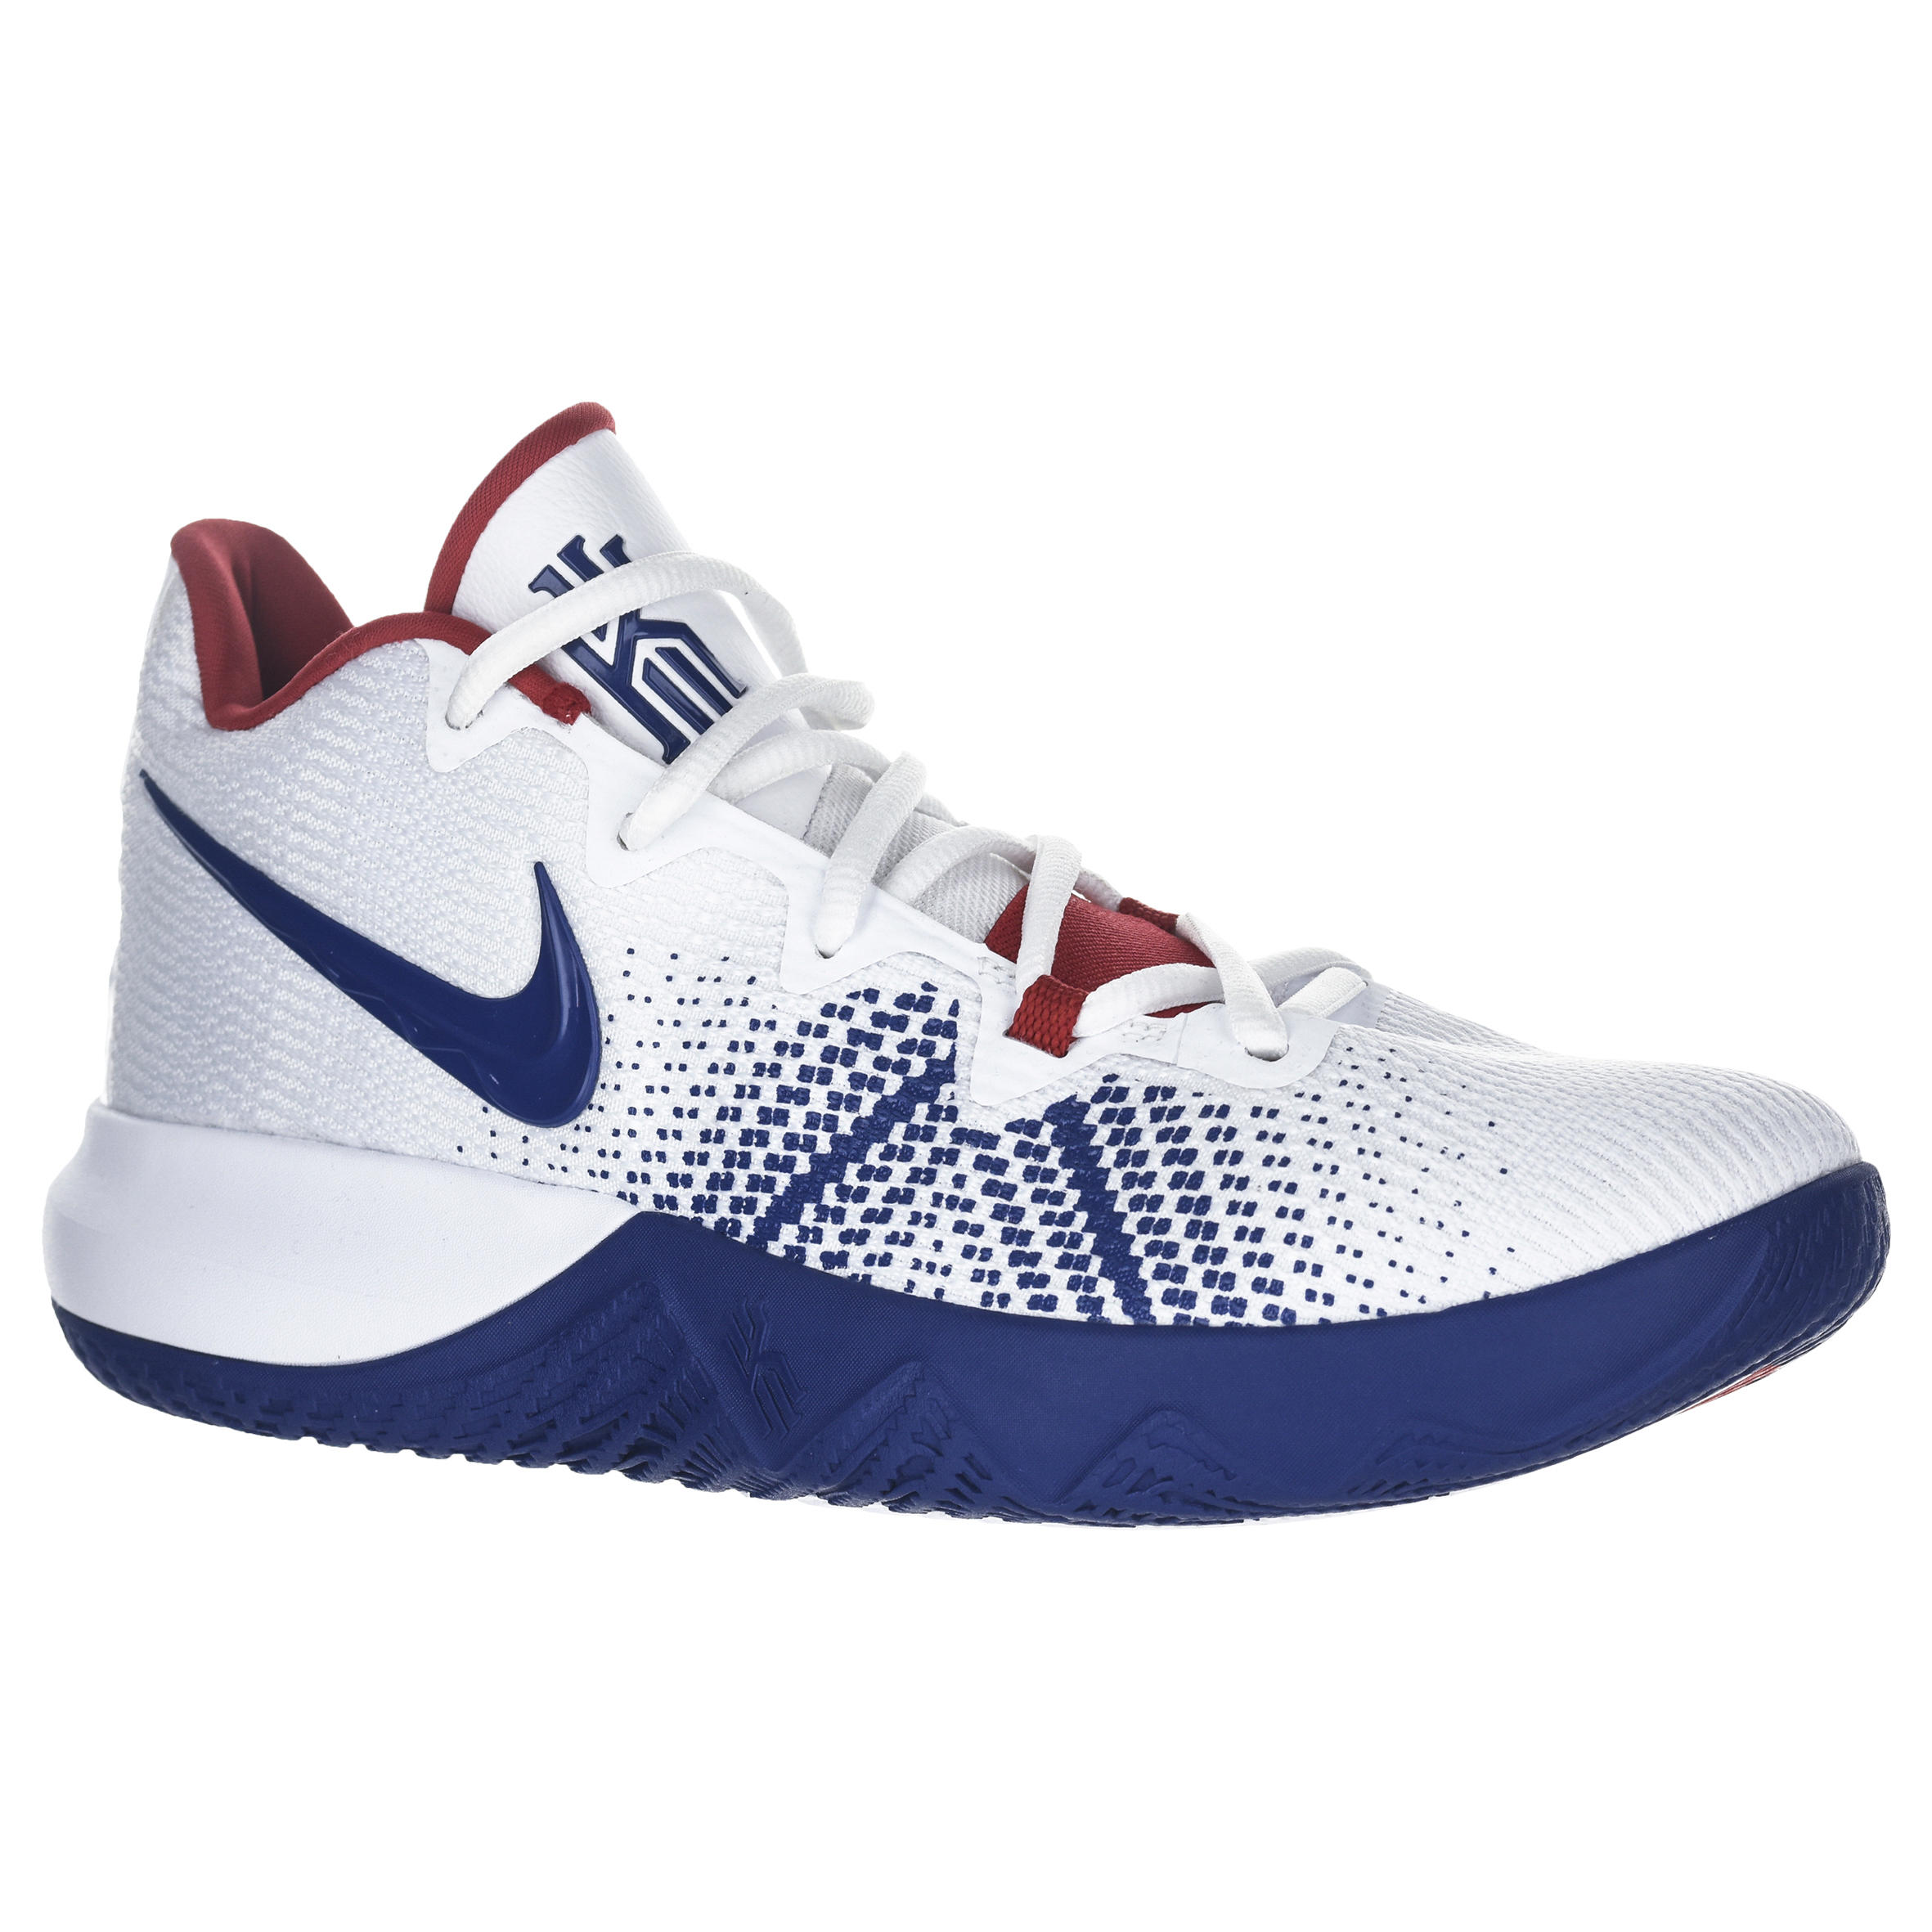 kyrie chaussure